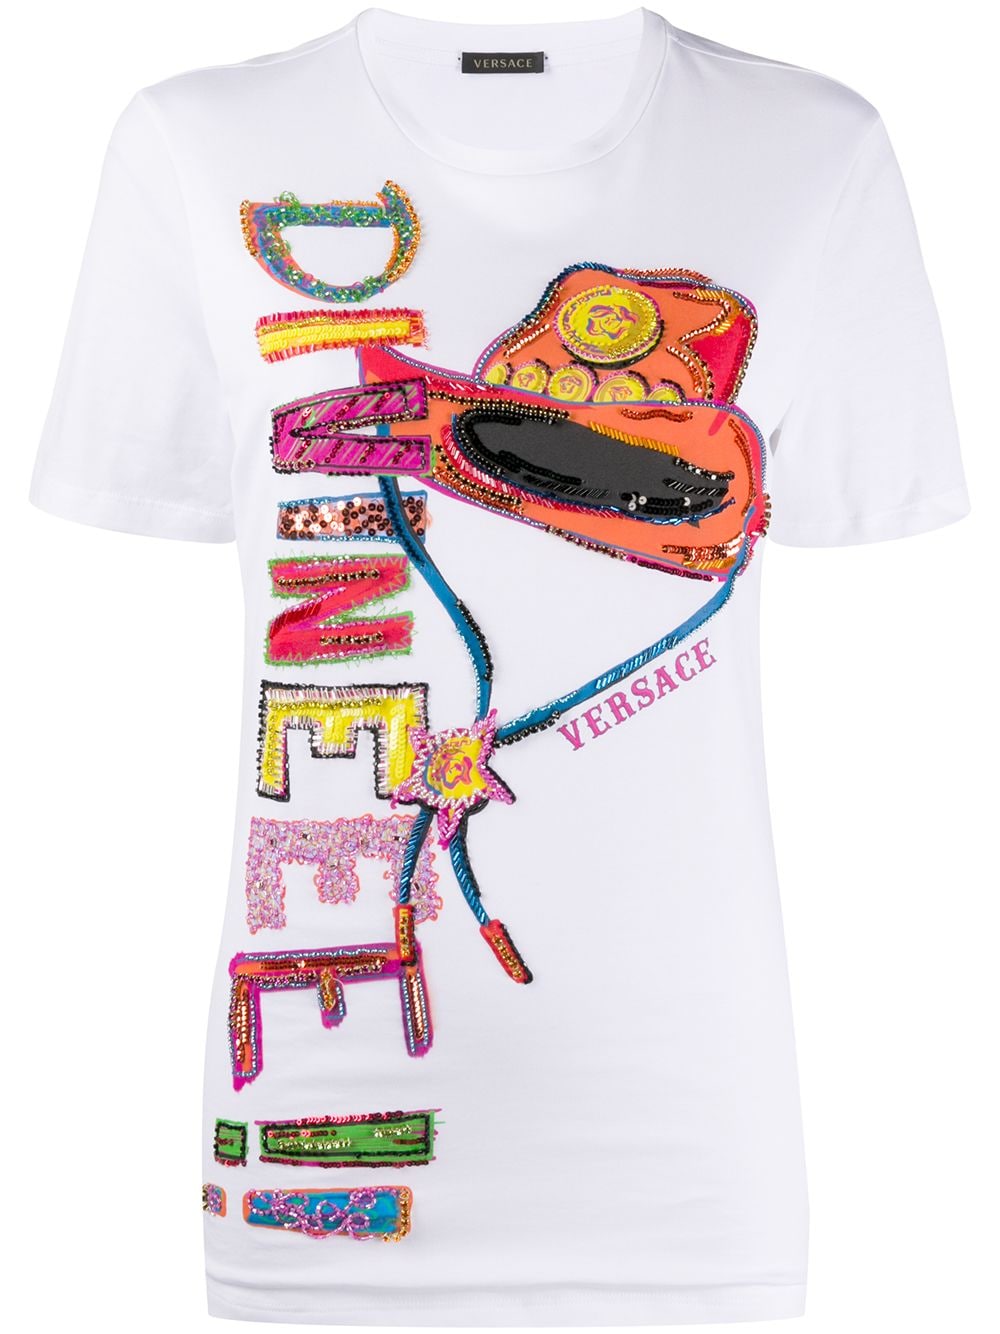 VERSACE EMBROIDERED WESTERN MOTIF T-SHIRT